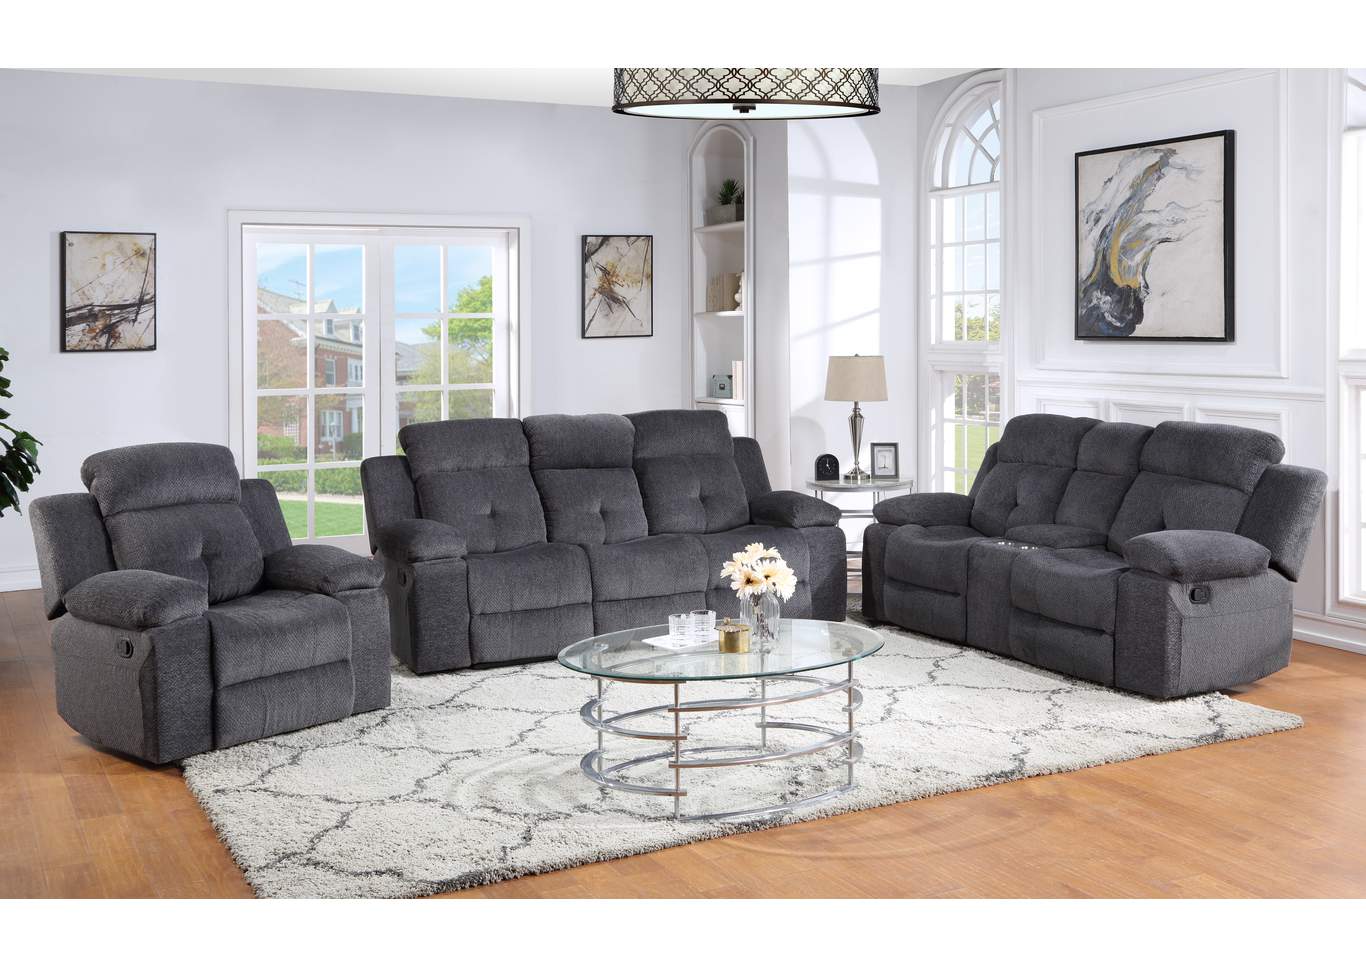 Sofa With 2 Recliner+Drop Down Tray,Galaxy Home Furniture